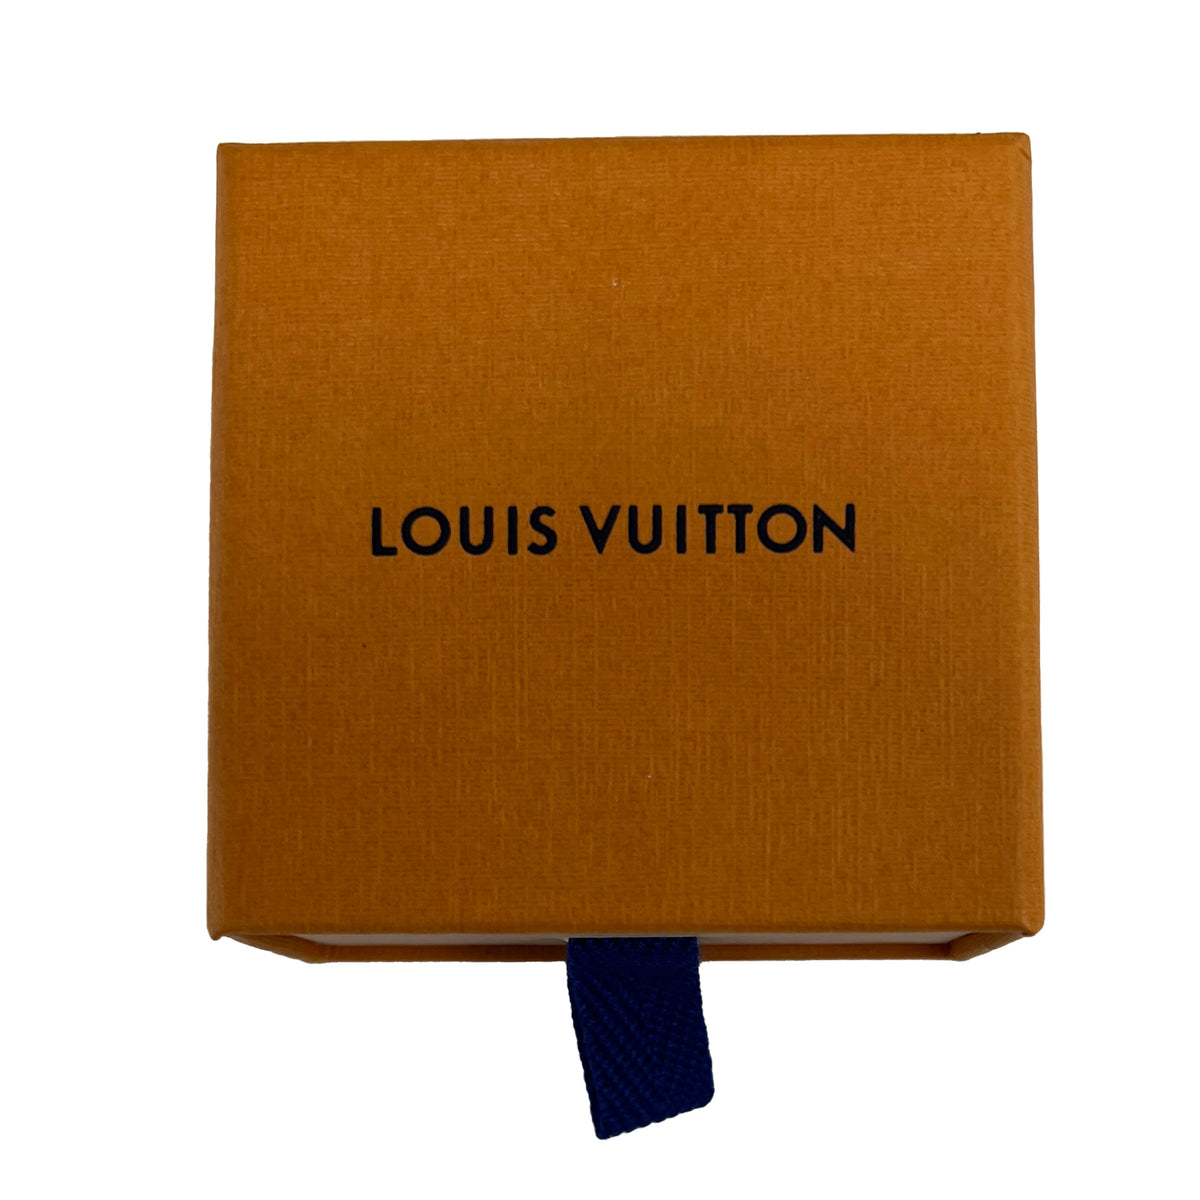 Louis Vuitton - Authenticated Blooming Bracelet - Gold Plated Gold for Women, Good Condition